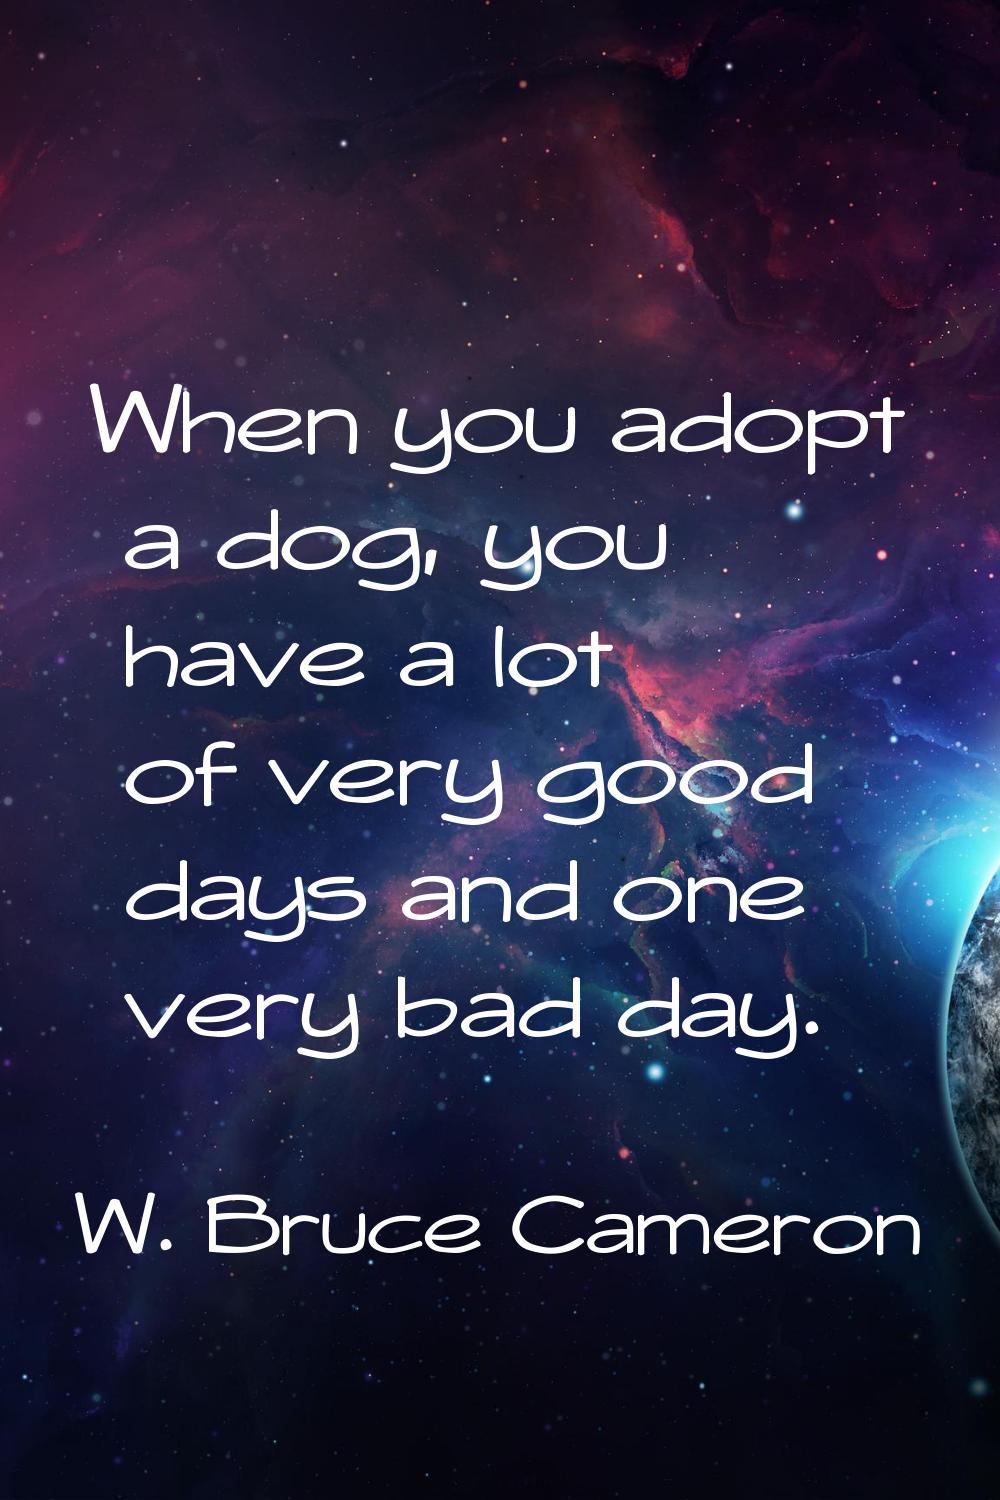 When you adopt a dog, you have a lot of very good days and one very bad day.